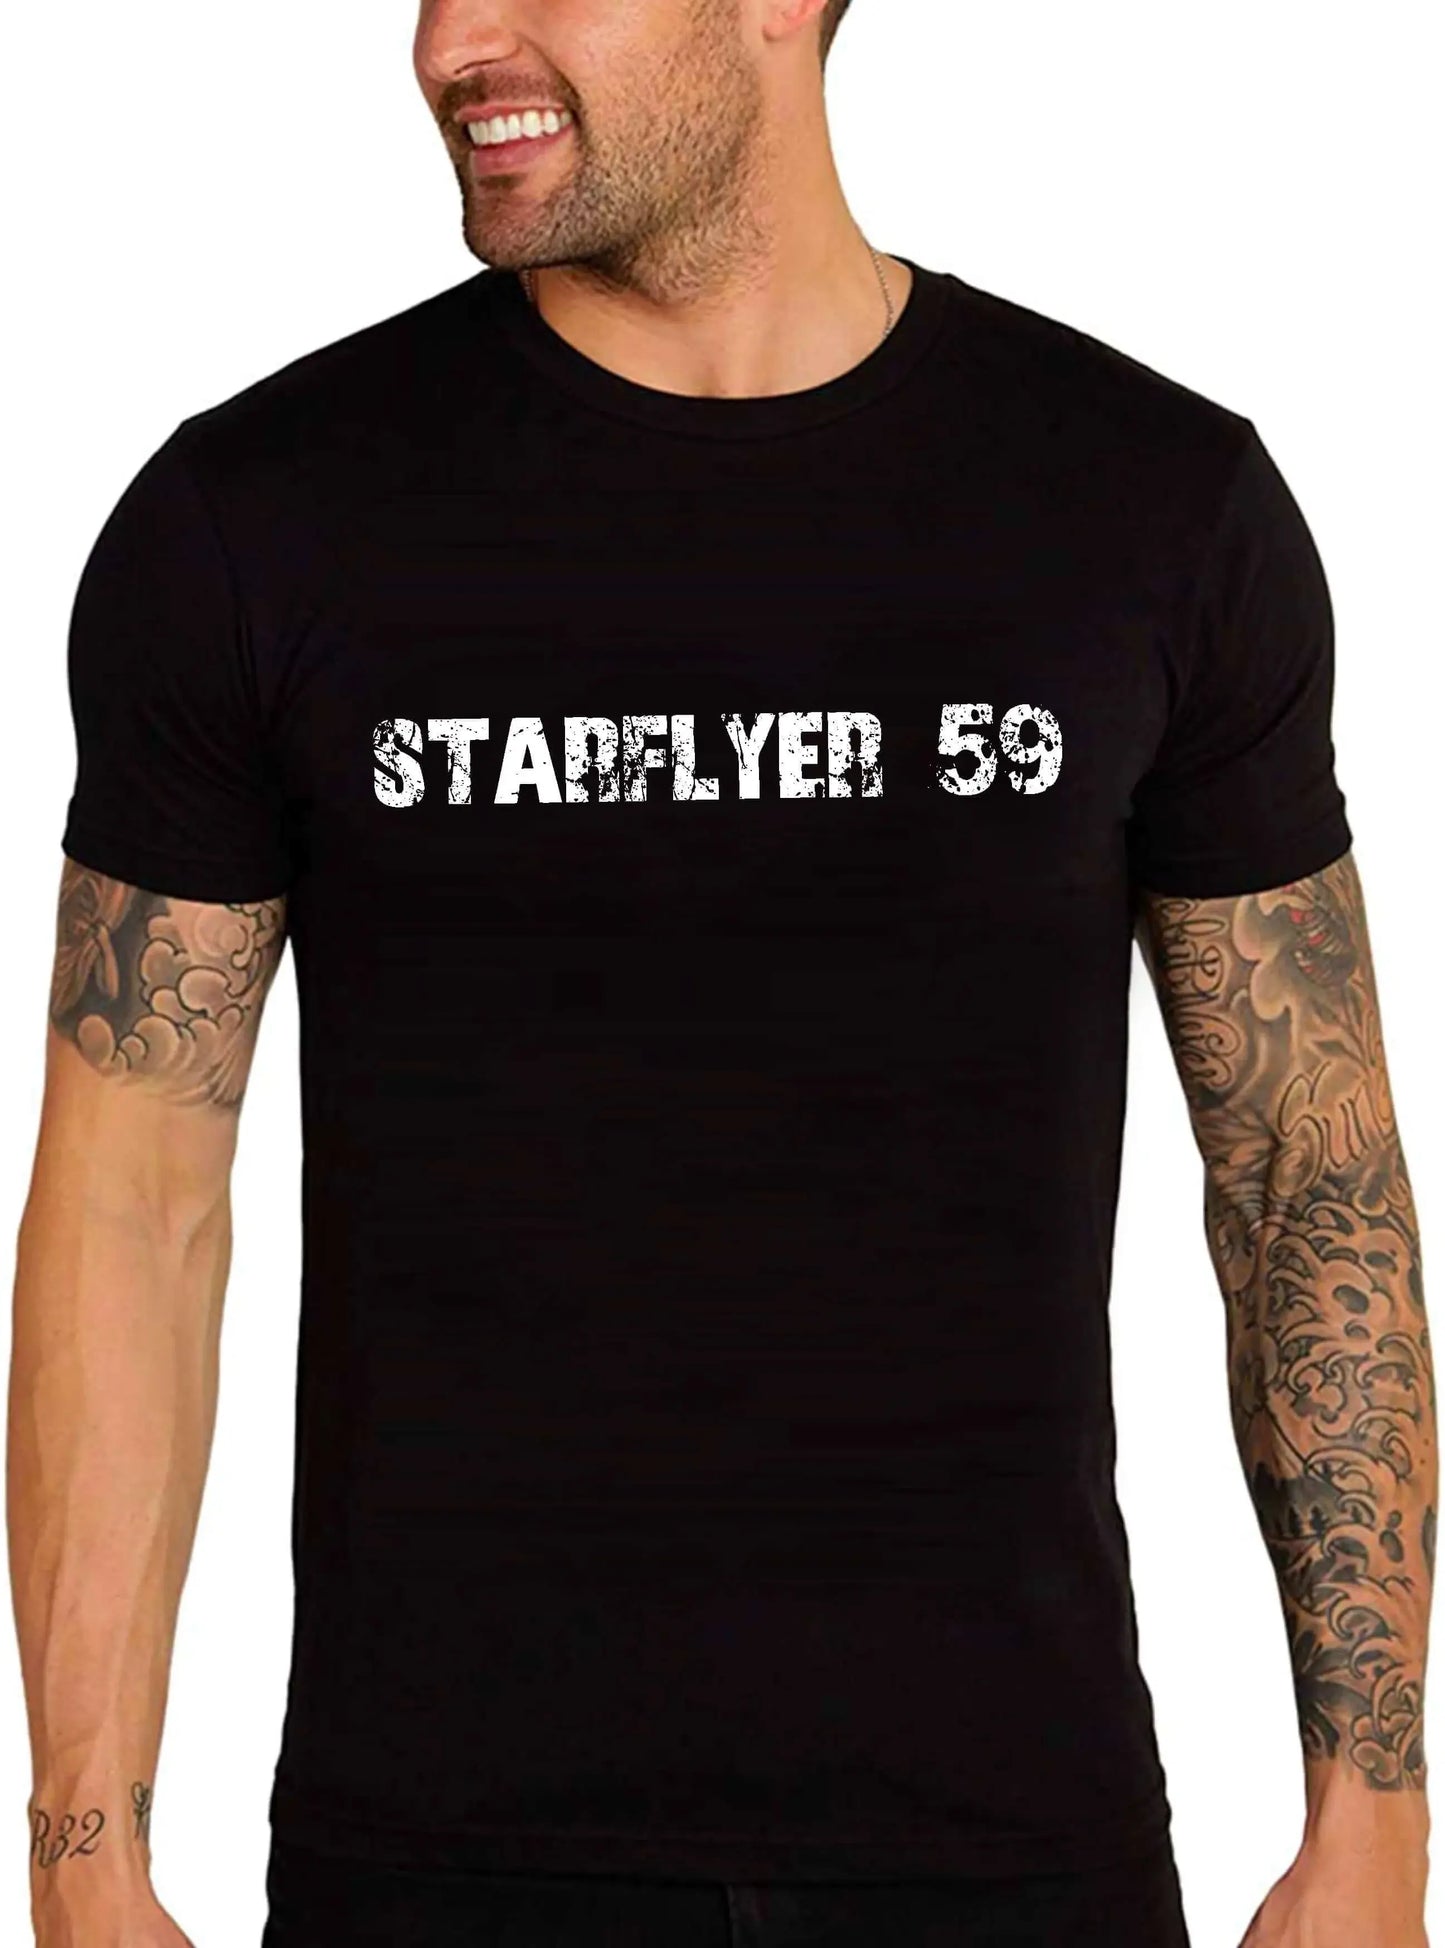 Men's Graphic T-Shirt Starflyer 59 59th Birthday Anniversary 59 Year Old Gift 1965 Vintage Eco-Friendly Short Sleeve Novelty Tee